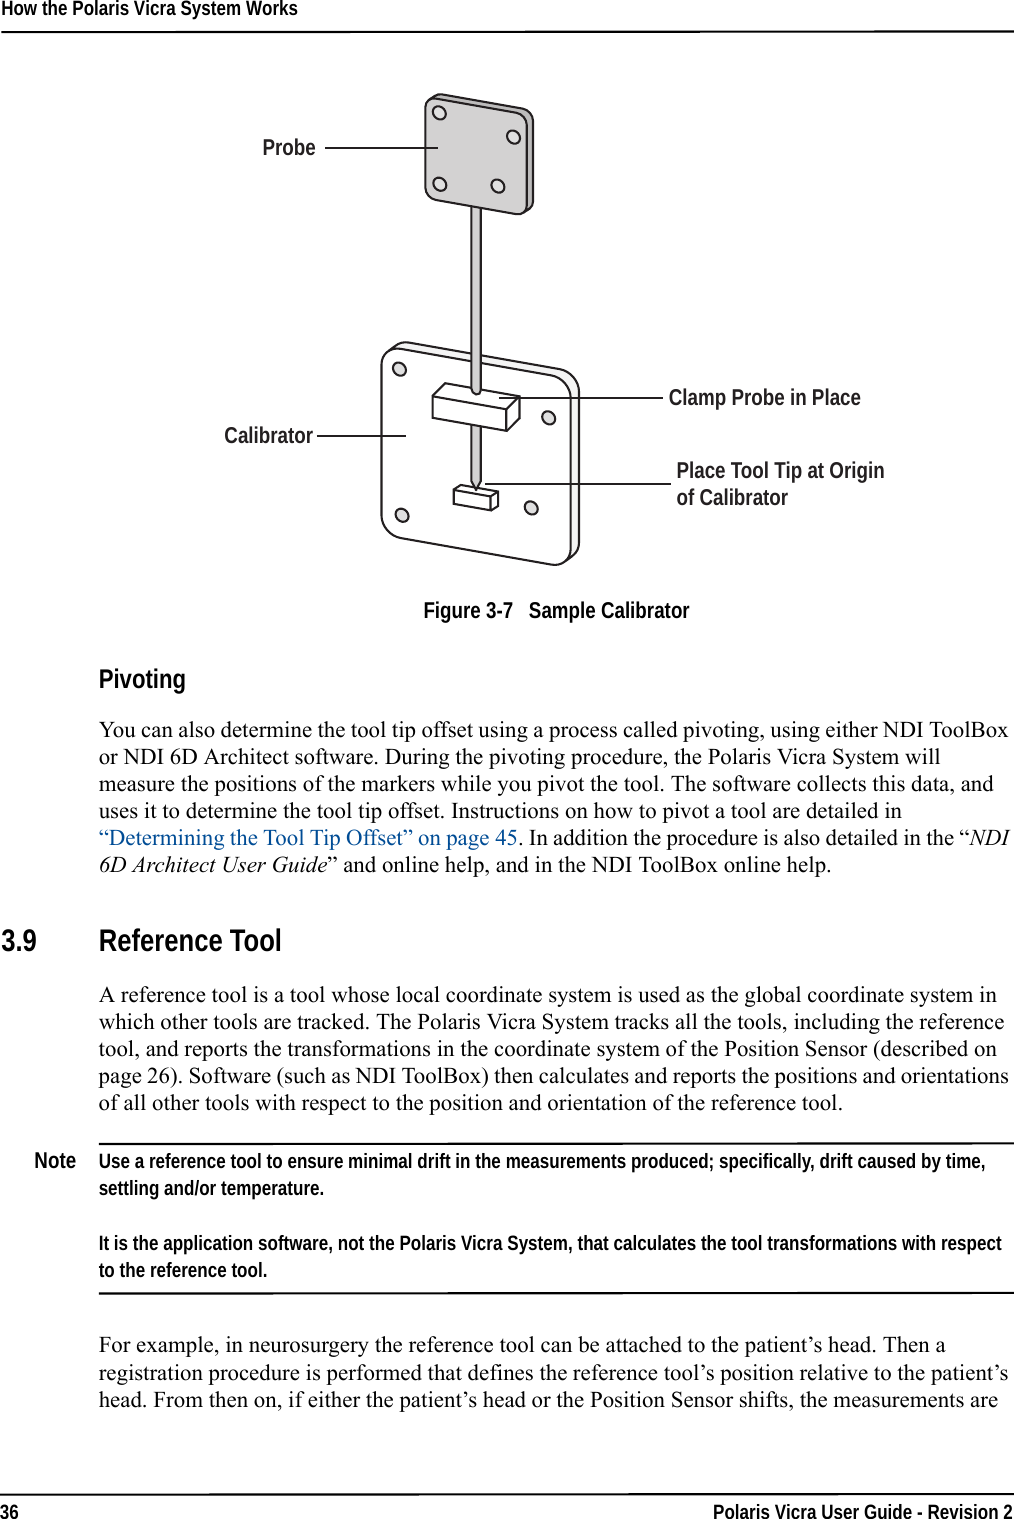 How the Polaris Vicra System Works36 Polaris Vicra User Guide - Revision 2Figure 3-7   Sample CalibratorPivotingYou can also determine the tool tip offset using a process called pivoting, using either NDI ToolBox or NDI 6D Architect software. During the pivoting procedure, the Polaris Vicra System will measure the positions of the markers while you pivot the tool. The software collects this data, and uses it to determine the tool tip offset. Instructions on how to pivot a tool are detailed in “Determining the Tool Tip Offset” on page 45. In addition the procedure is also detailed in the “NDI 6D Architect User Guide” and online help, and in the NDI ToolBox online help.3.9 Reference ToolA reference tool is a tool whose local coordinate system is used as the global coordinate system in which other tools are tracked. The Polaris Vicra System tracks all the tools, including the reference tool, and reports the transformations in the coordinate system of the Position Sensor (described on page 26). Software (such as NDI ToolBox) then calculates and reports the positions and orientations of all other tools with respect to the position and orientation of the reference tool.Note Use a reference tool to ensure minimal drift in the measurements produced; specifically, drift caused by time, settling and/or temperature.It is the application software, not the Polaris Vicra System, that calculates the tool transformations with respect to the reference tool.For example, in neurosurgery the reference tool can be attached to the patient’s head. Then a registration procedure is performed that defines the reference tool’s position relative to the patient’s head. From then on, if either the patient’s head or the Position Sensor shifts, the measurements are ProbeCalibratorClamp Probe in PlacePlace Tool Tip at Origin of Calibrator